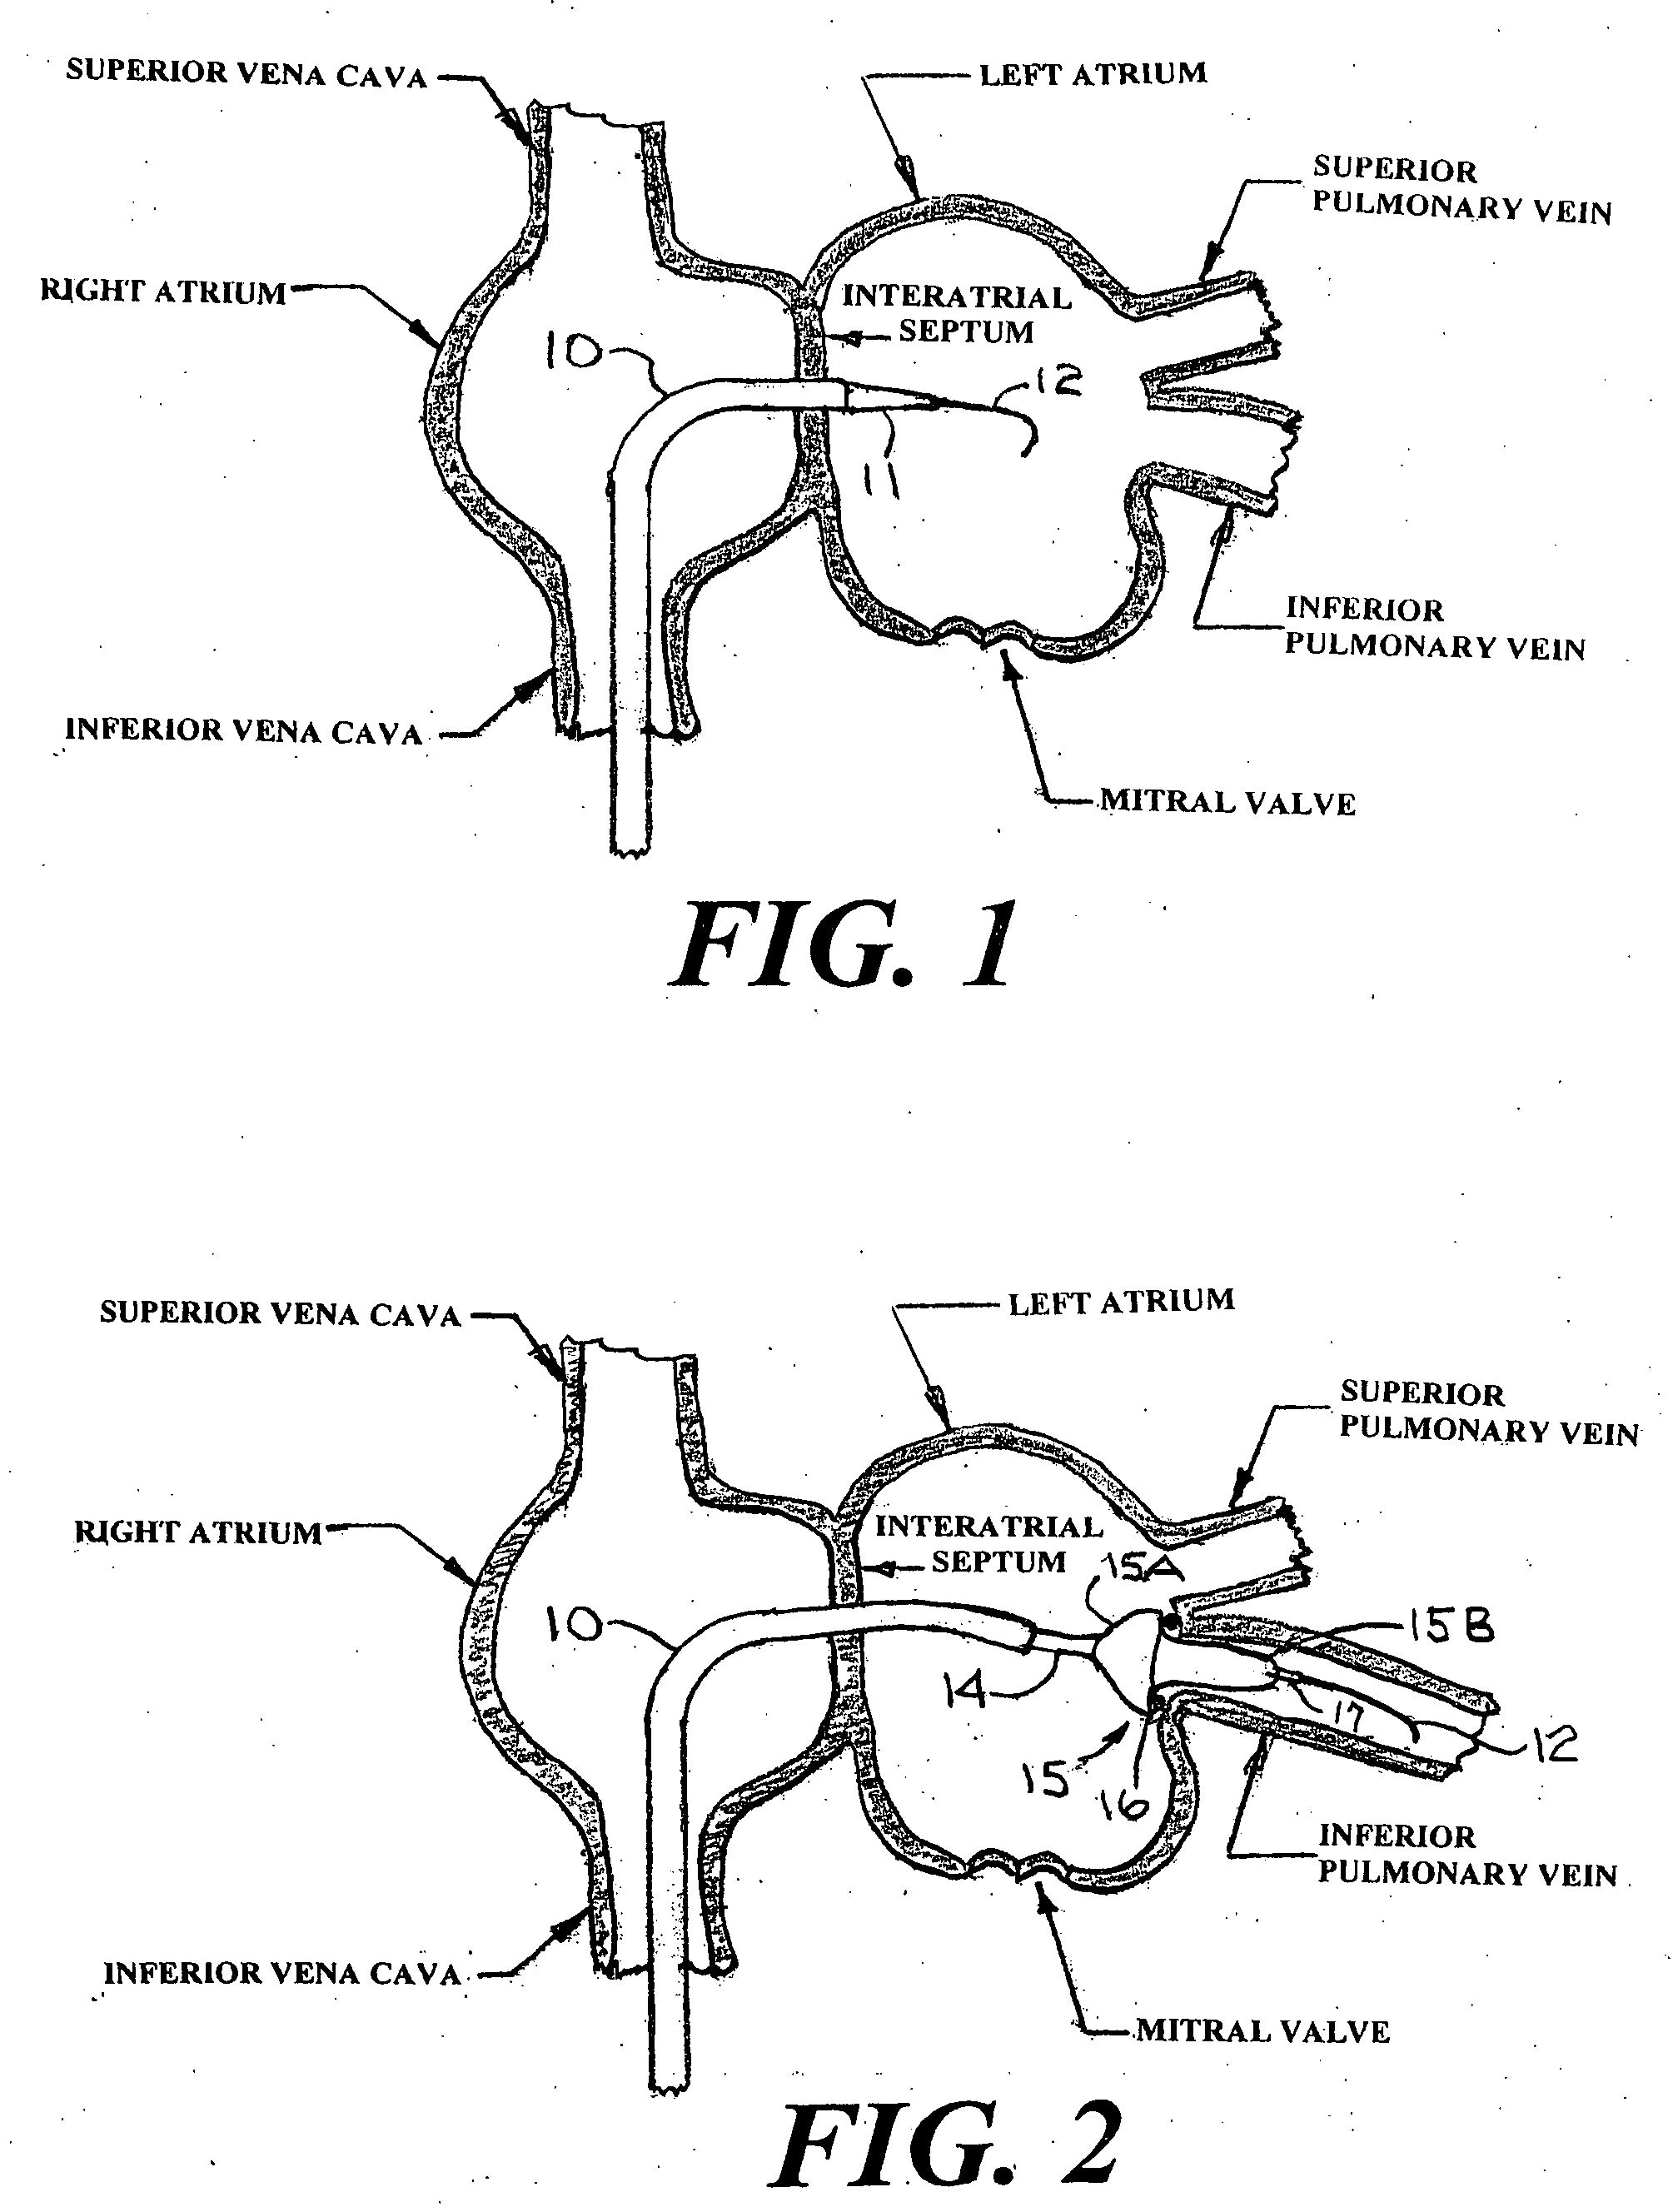 Catheter system for the treatment of atrial fibrillation